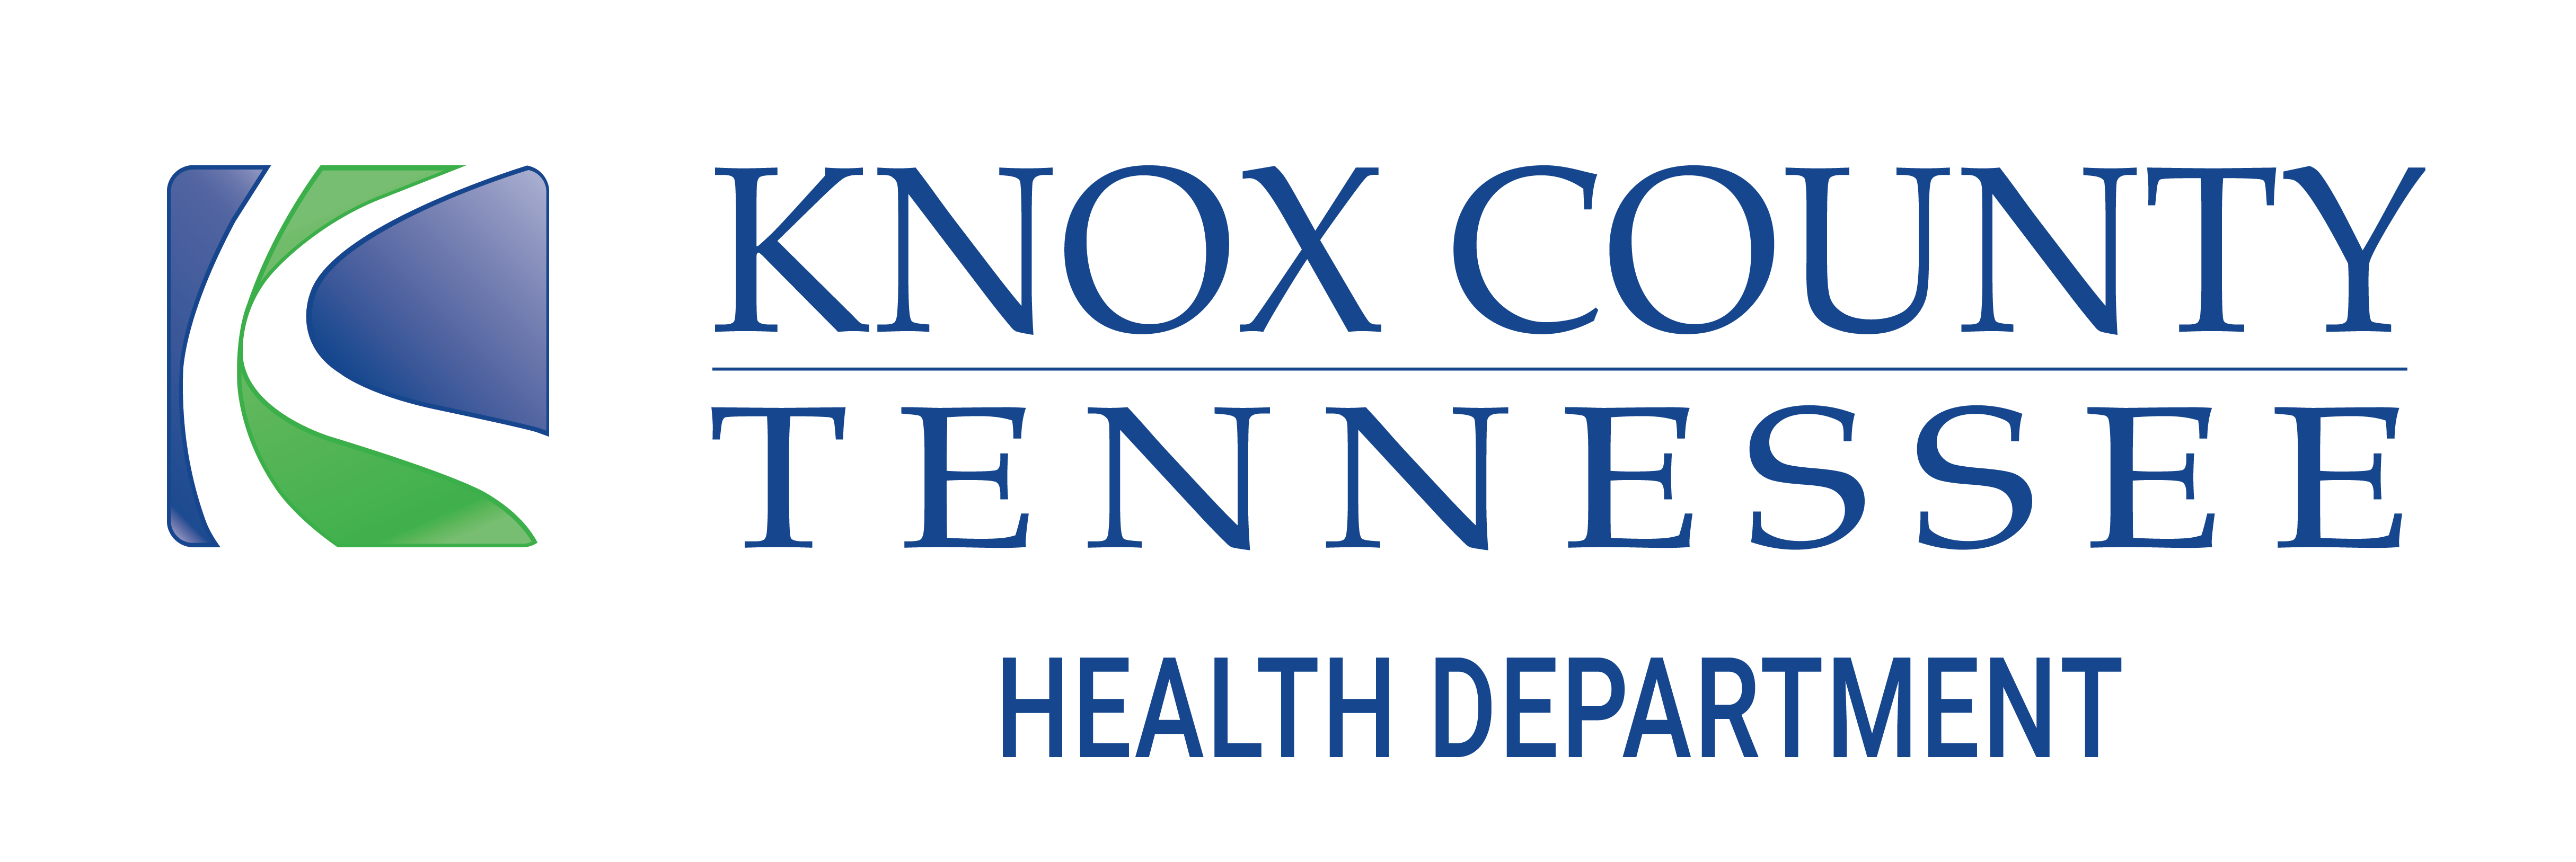 Knox County Tennessee Health Department